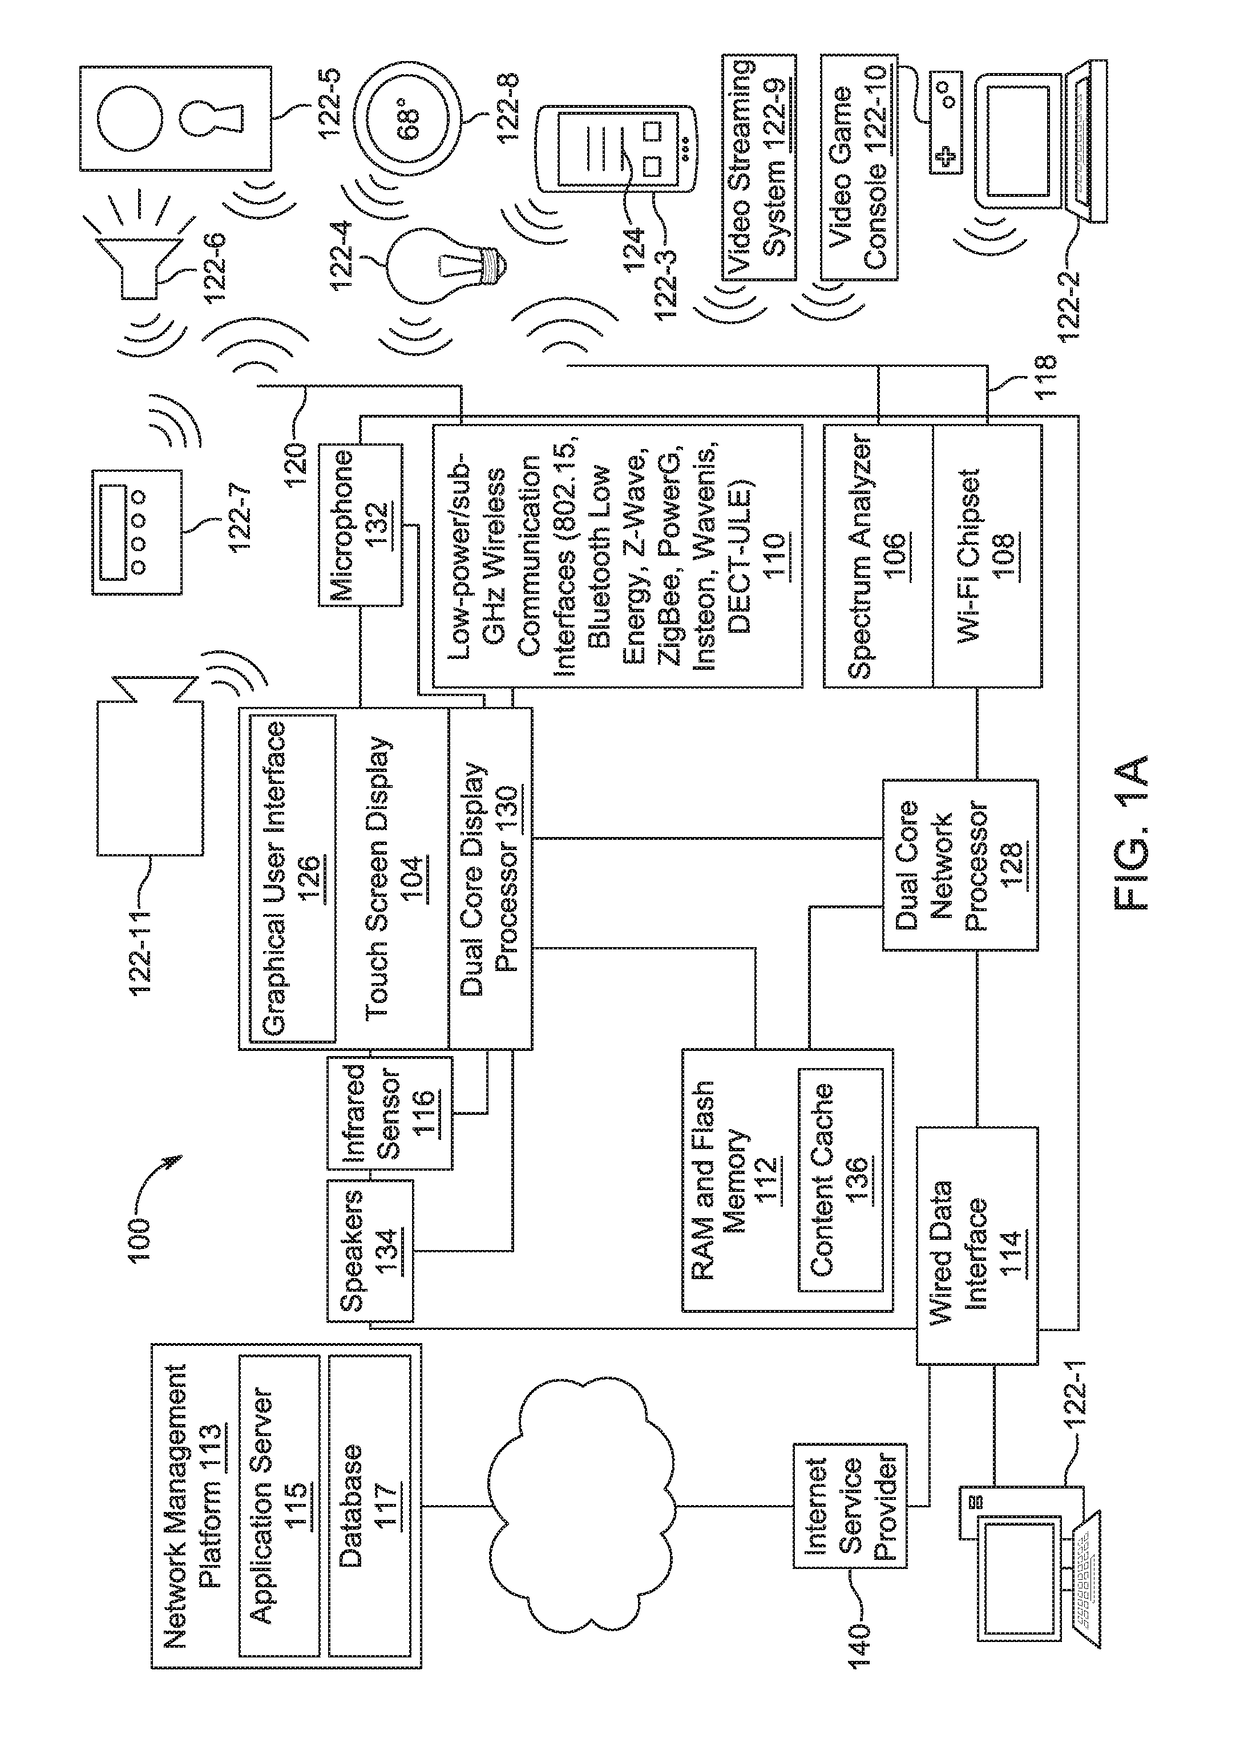 Application Programming Interface for Premises Networking Device